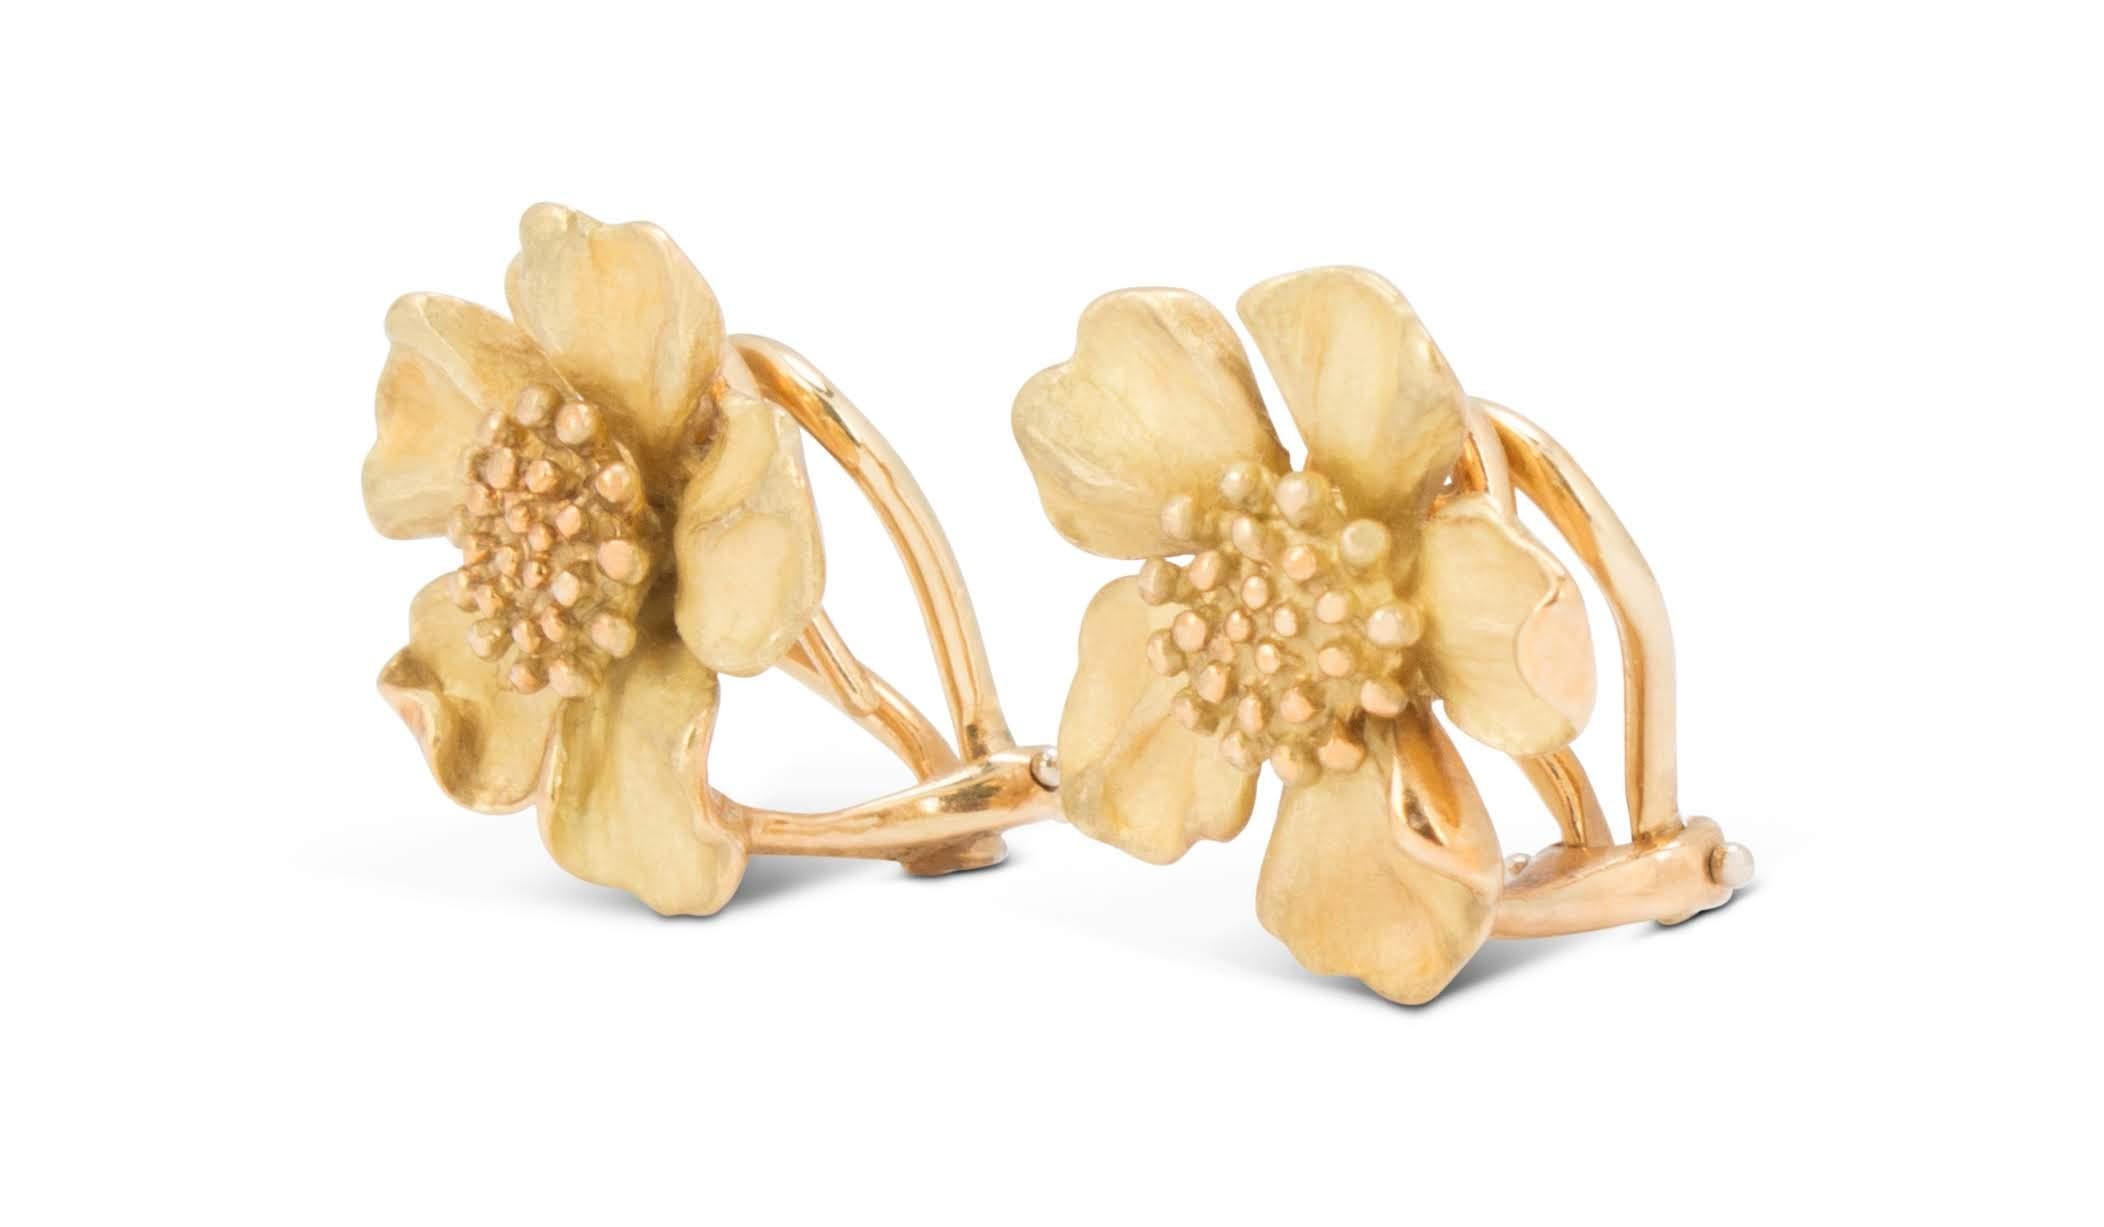 Authentic Tiffany & Co. Dogwood flower earrings crafted in 18 karat yellow gold.  Featuring a charming floral design with delicately up-turned petals, each earring measures 17mm x 17mm.  Signed T&CO, 750.  CIRCA 1990s